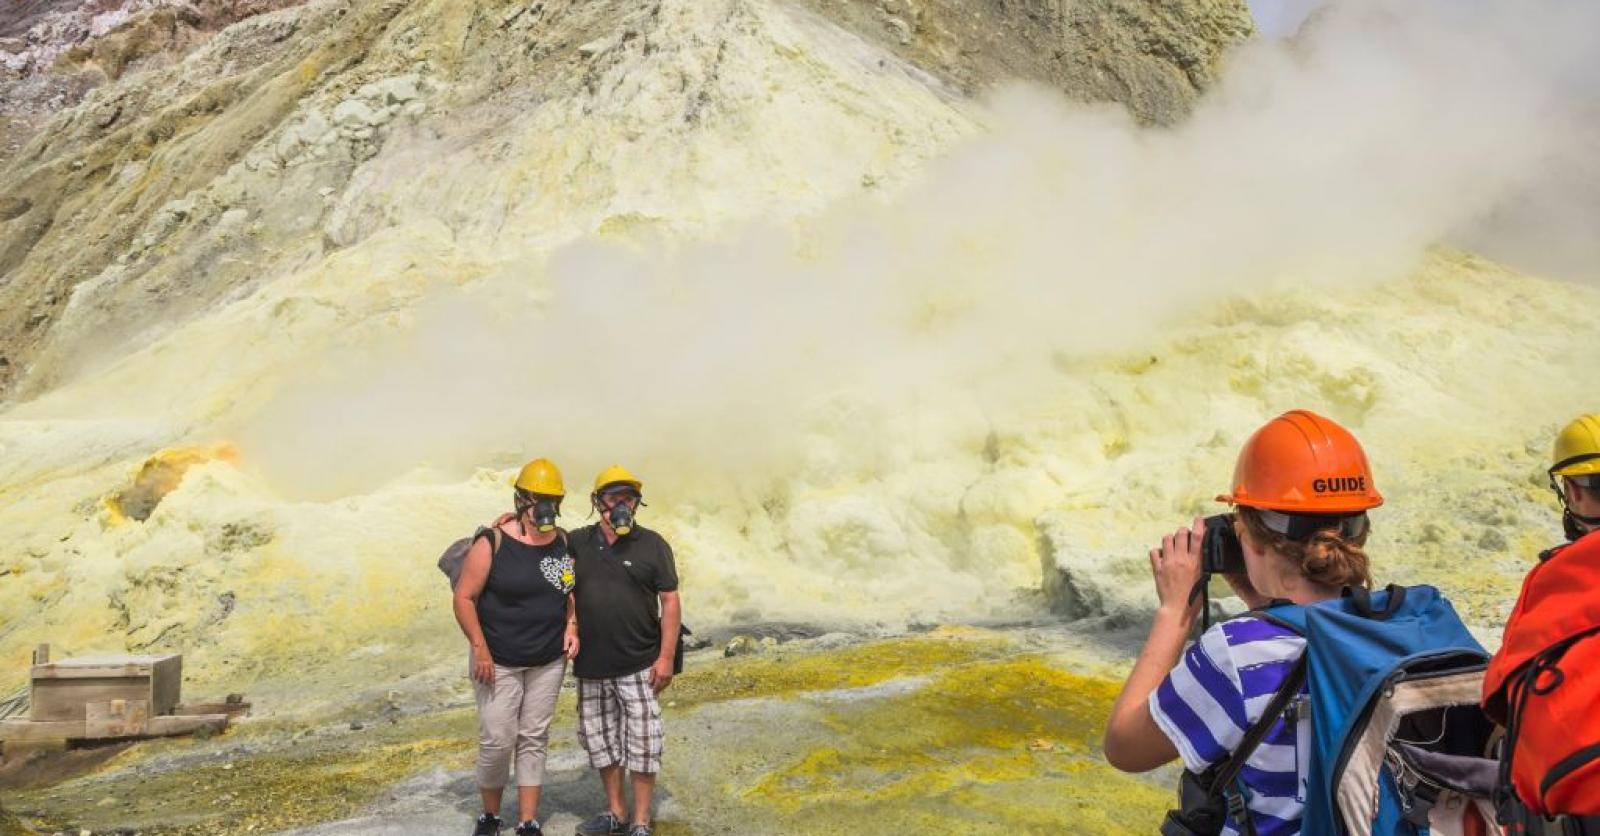 22 tourists soaked in the ashes of a burning volcano in New Zealand: who is responsible?